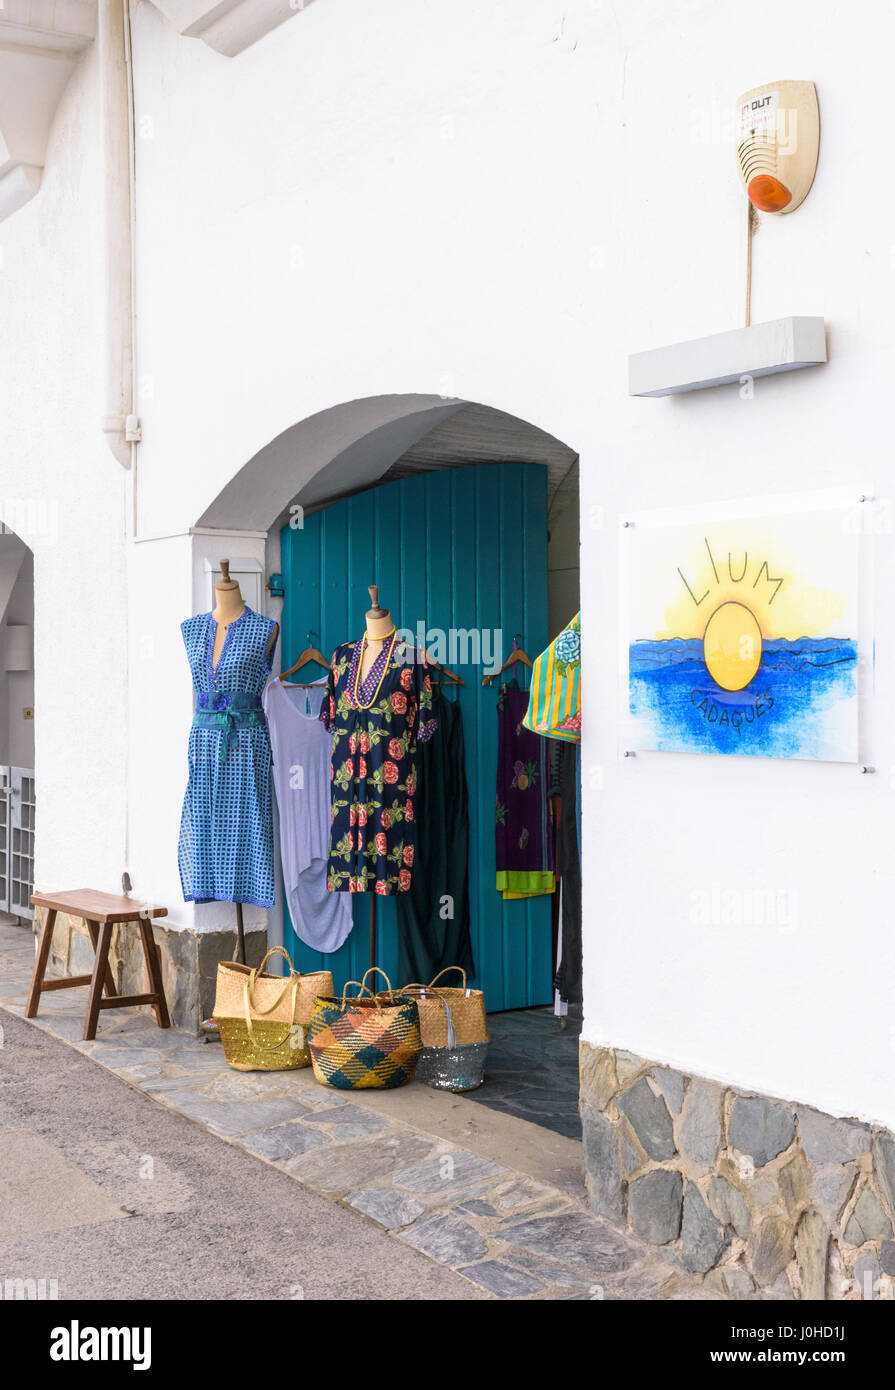 Detail of the entrance of a shop in an old building in Cadaques, Catalonia, Spain Stock Photo